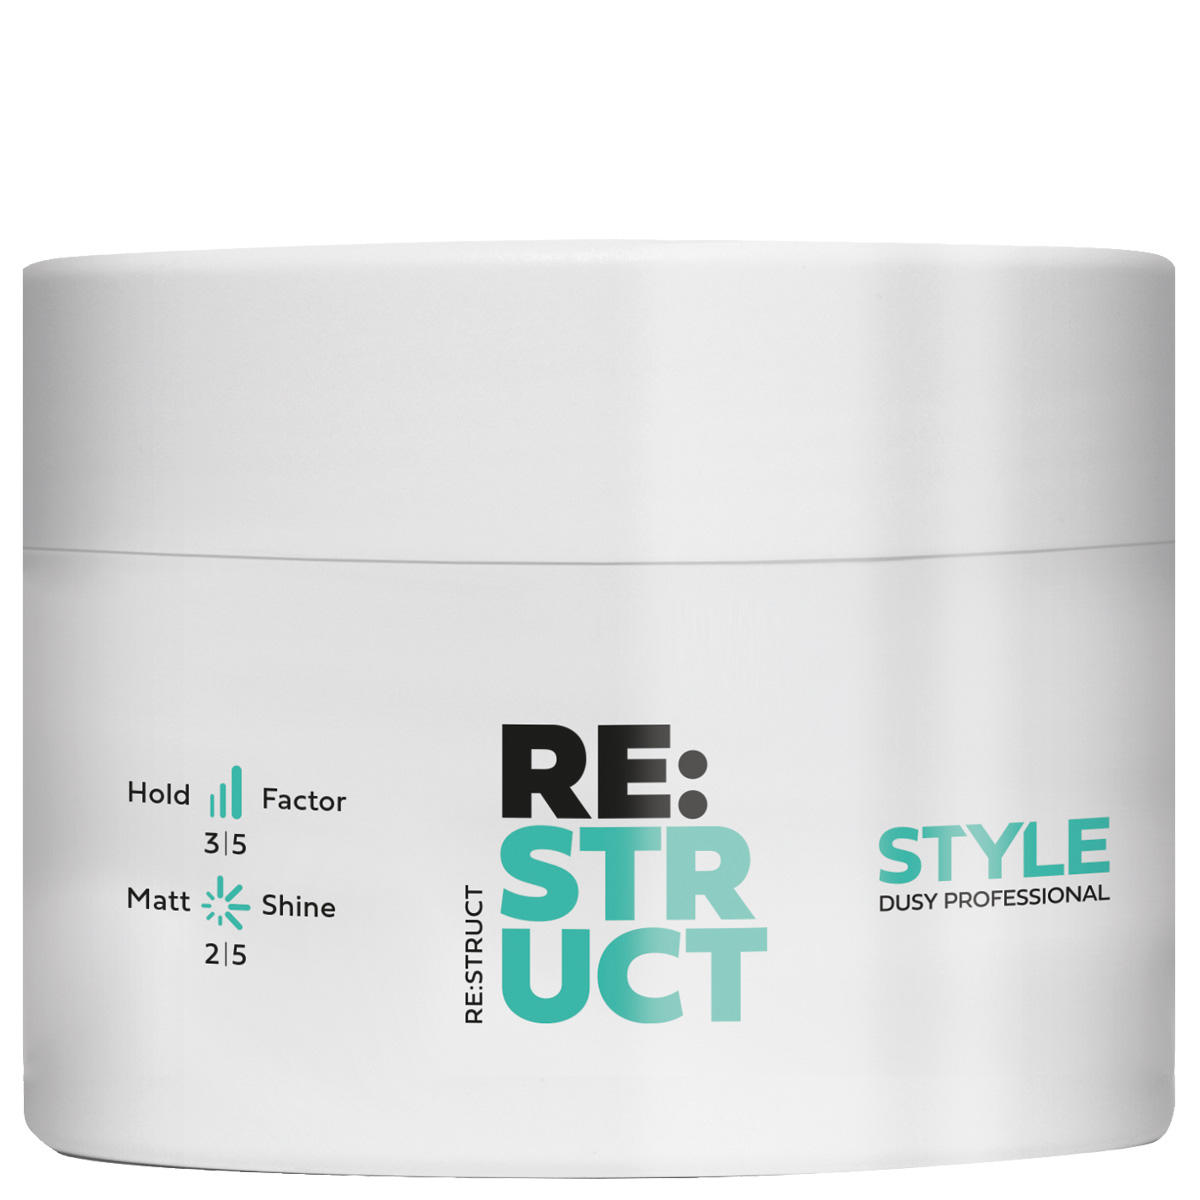 dusy professional Style Re:Struct 100 ml - 1